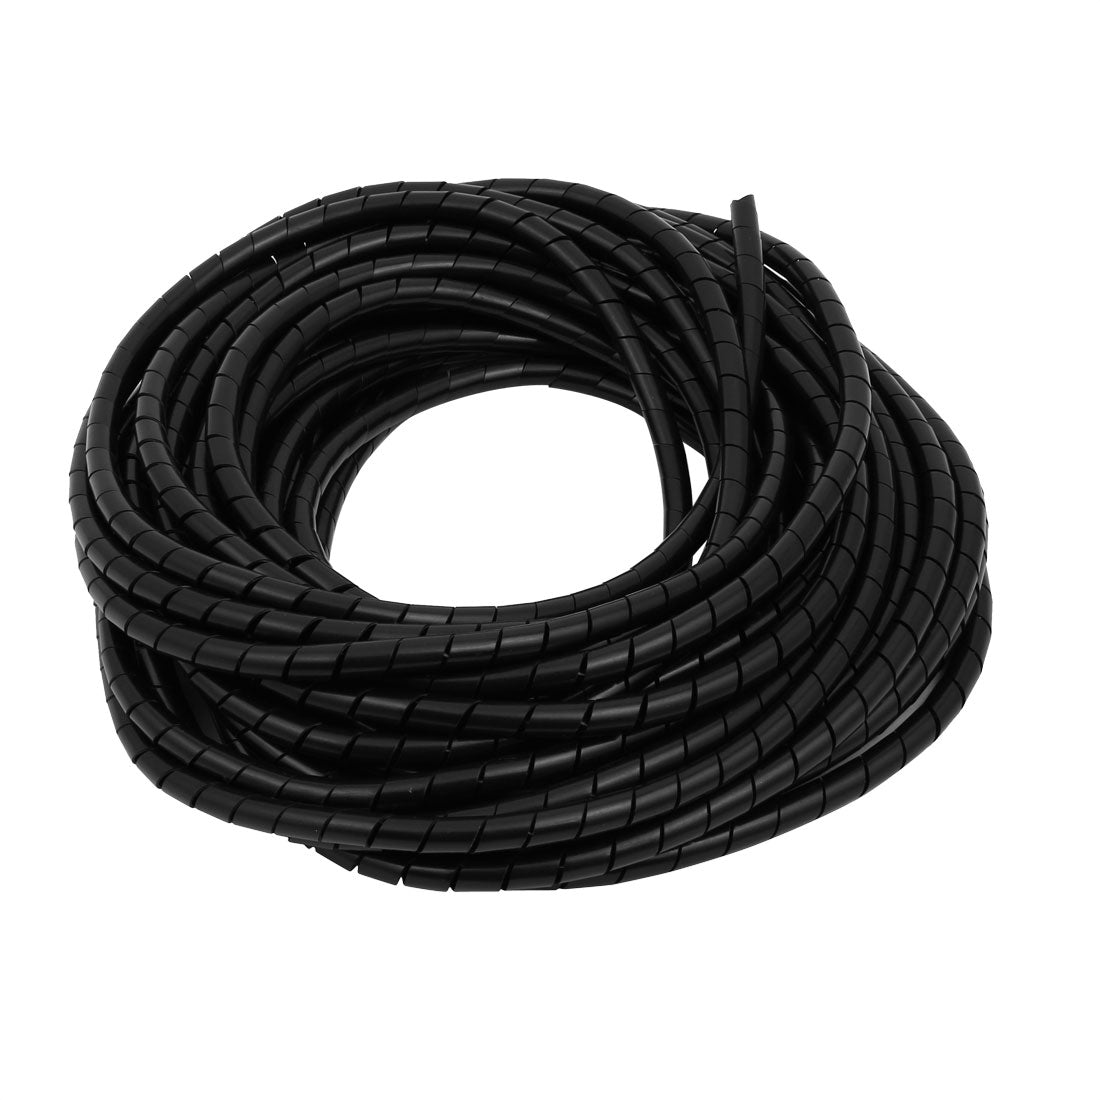 uxcell Uxcell 6mm Dia Flexible Spiral Tube Cable Wire Wrap Computer Manage Cord Black 10 Meters Long